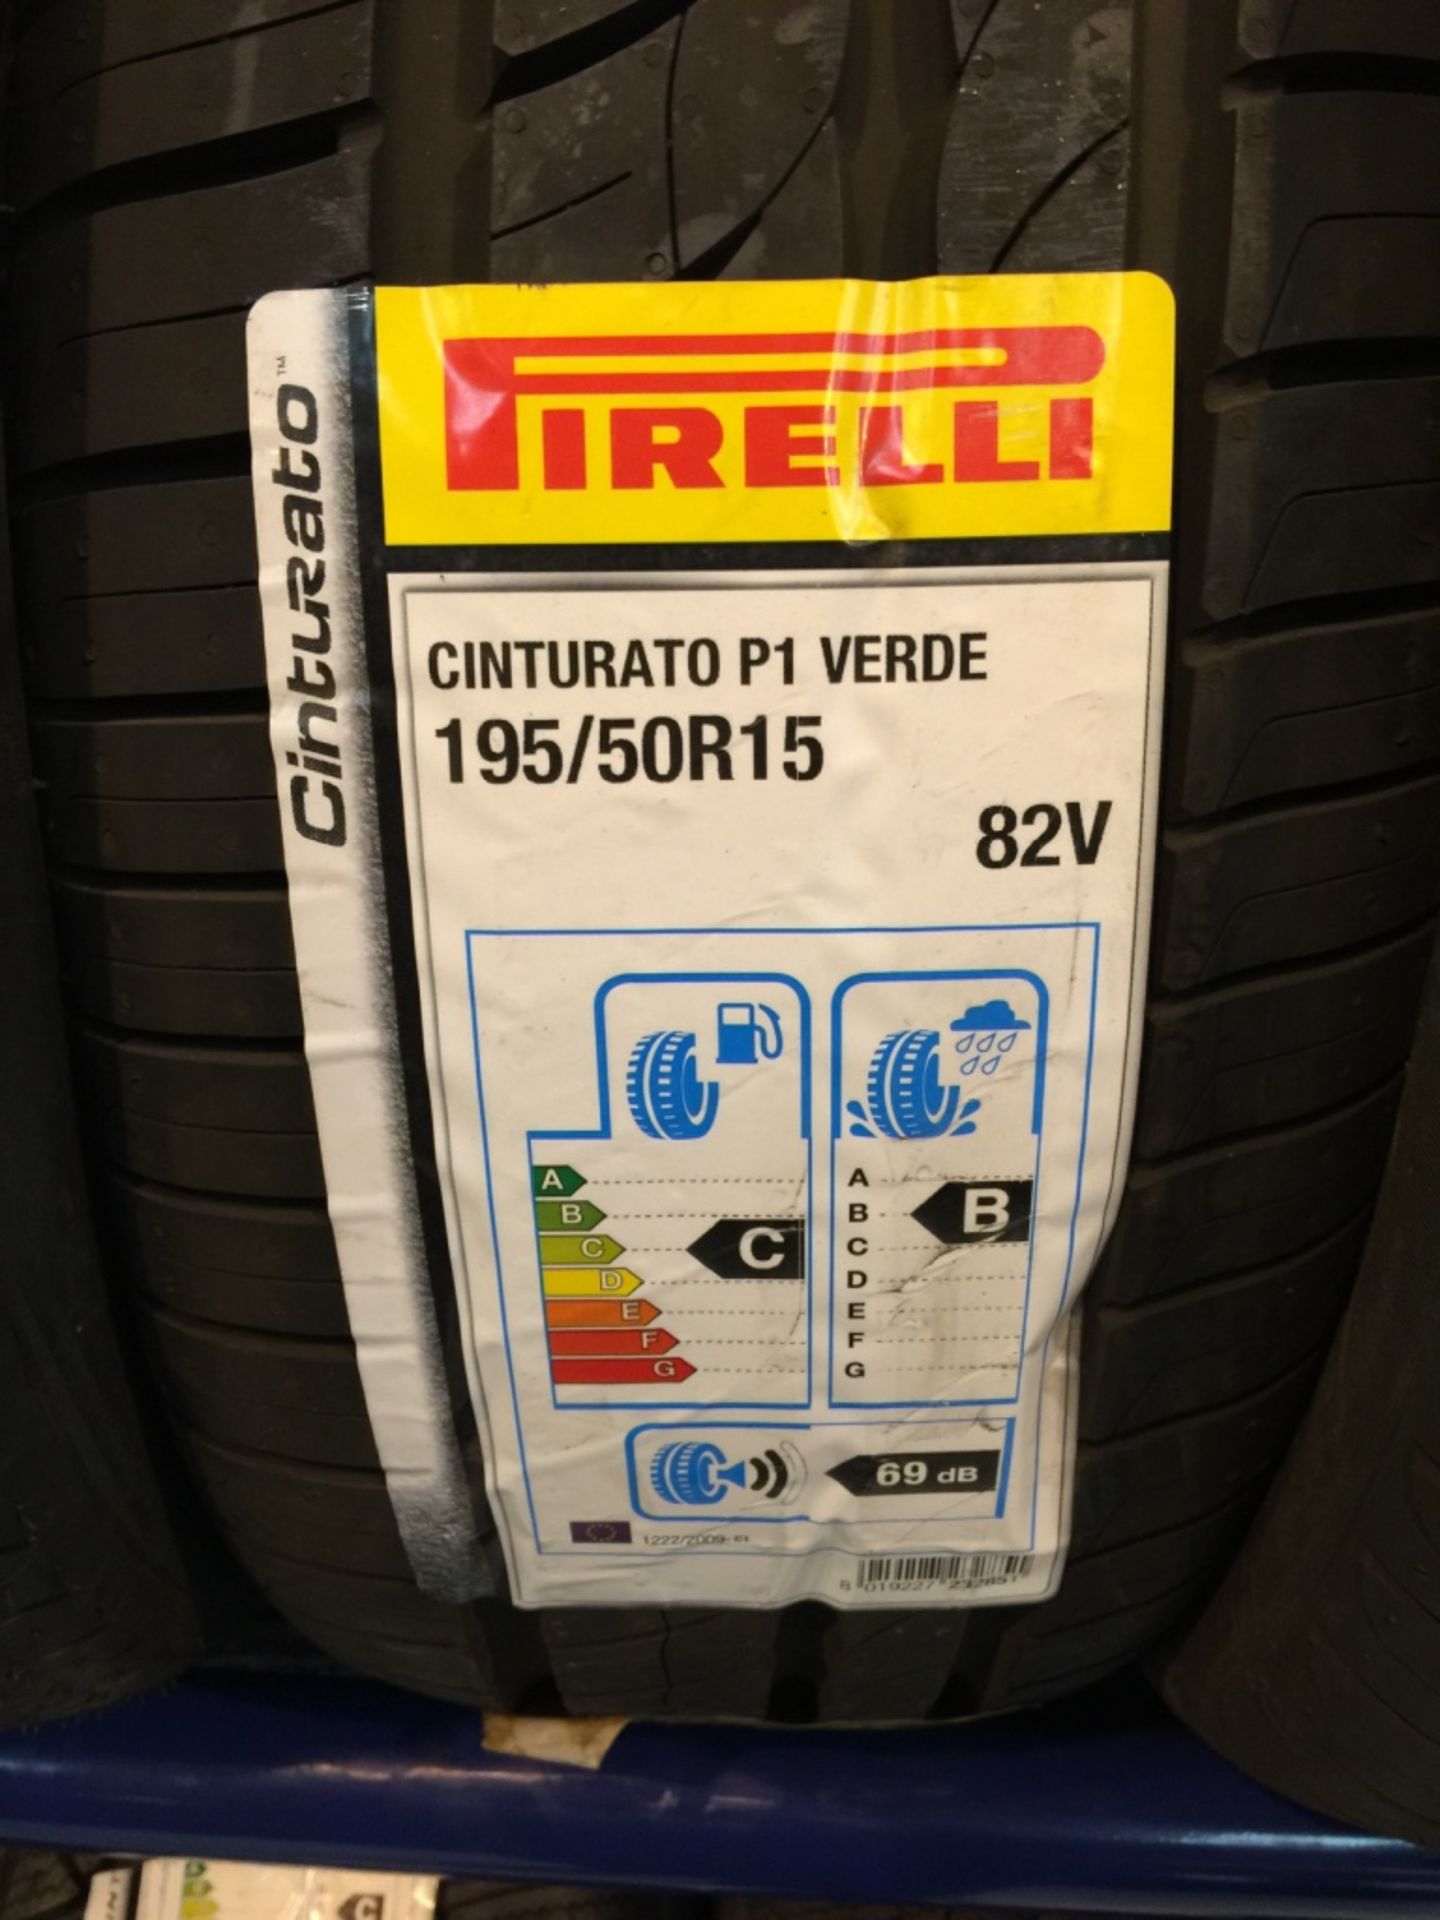 54: Pirelli Tyres Car & 4X4 - Many Large Sizes to include 18,19,21" Please see further Pictures ( - Image 32 of 55